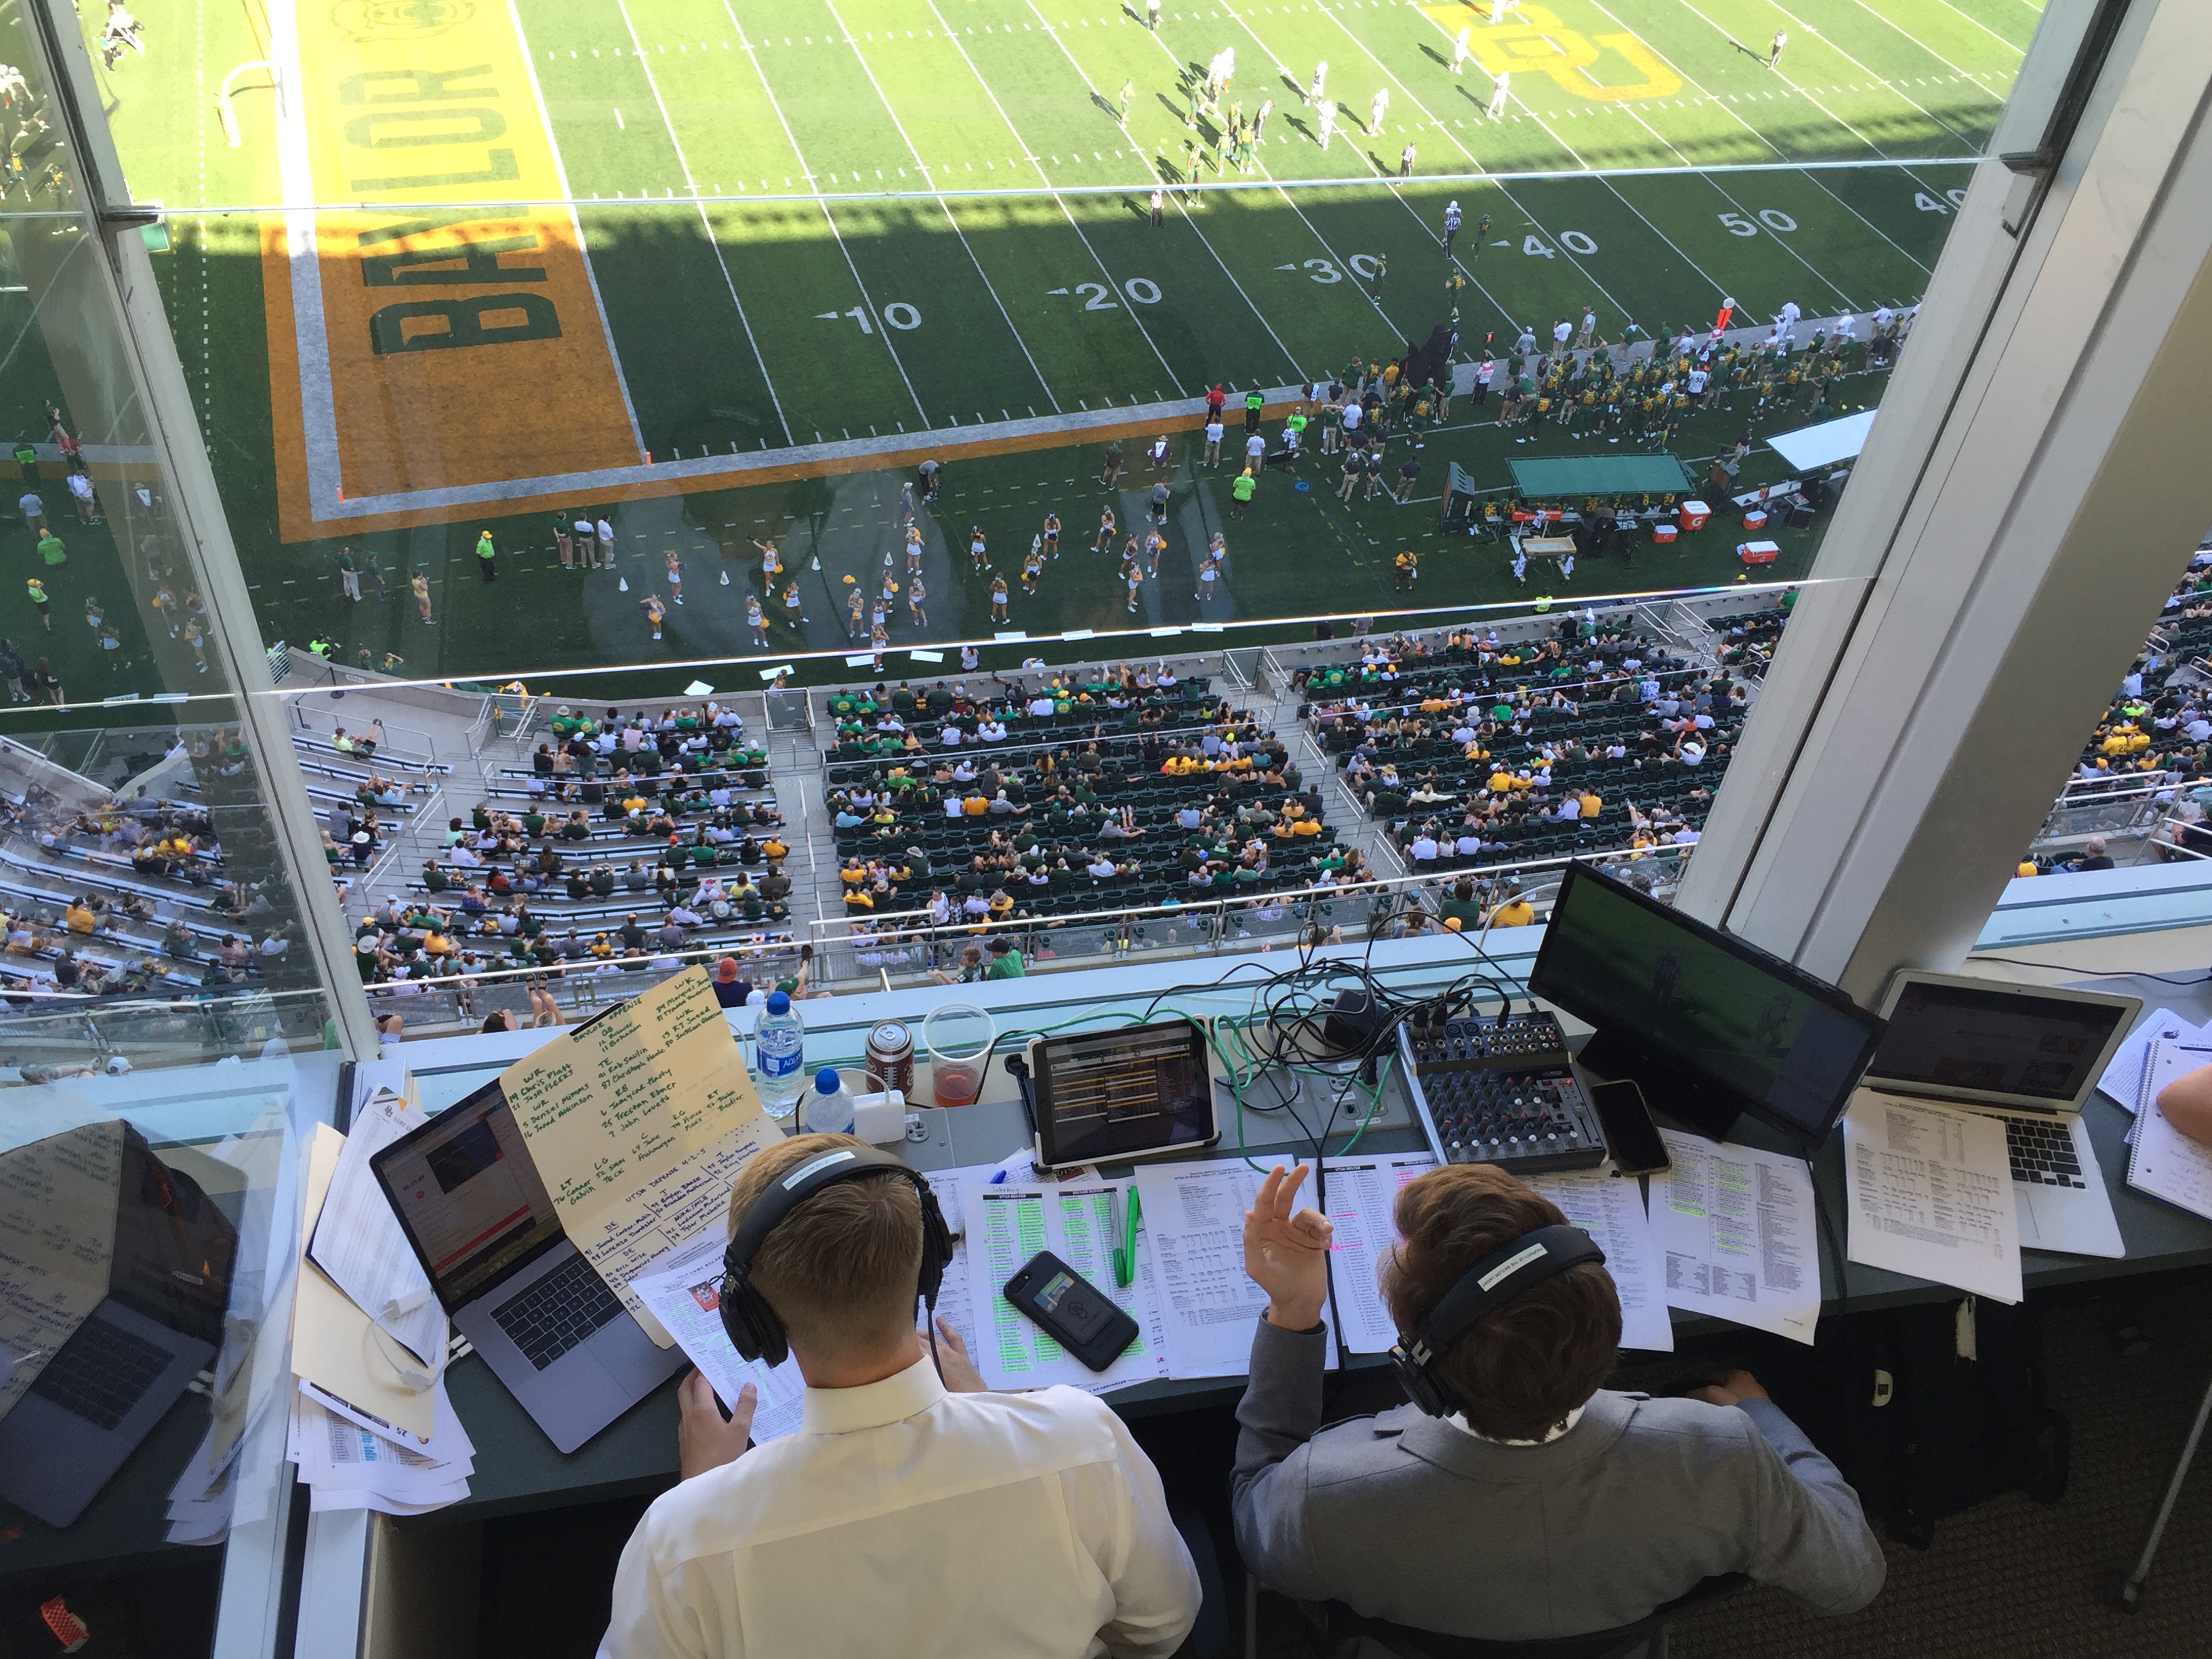 Football game in Baylor Stadium for Radio/Podcast